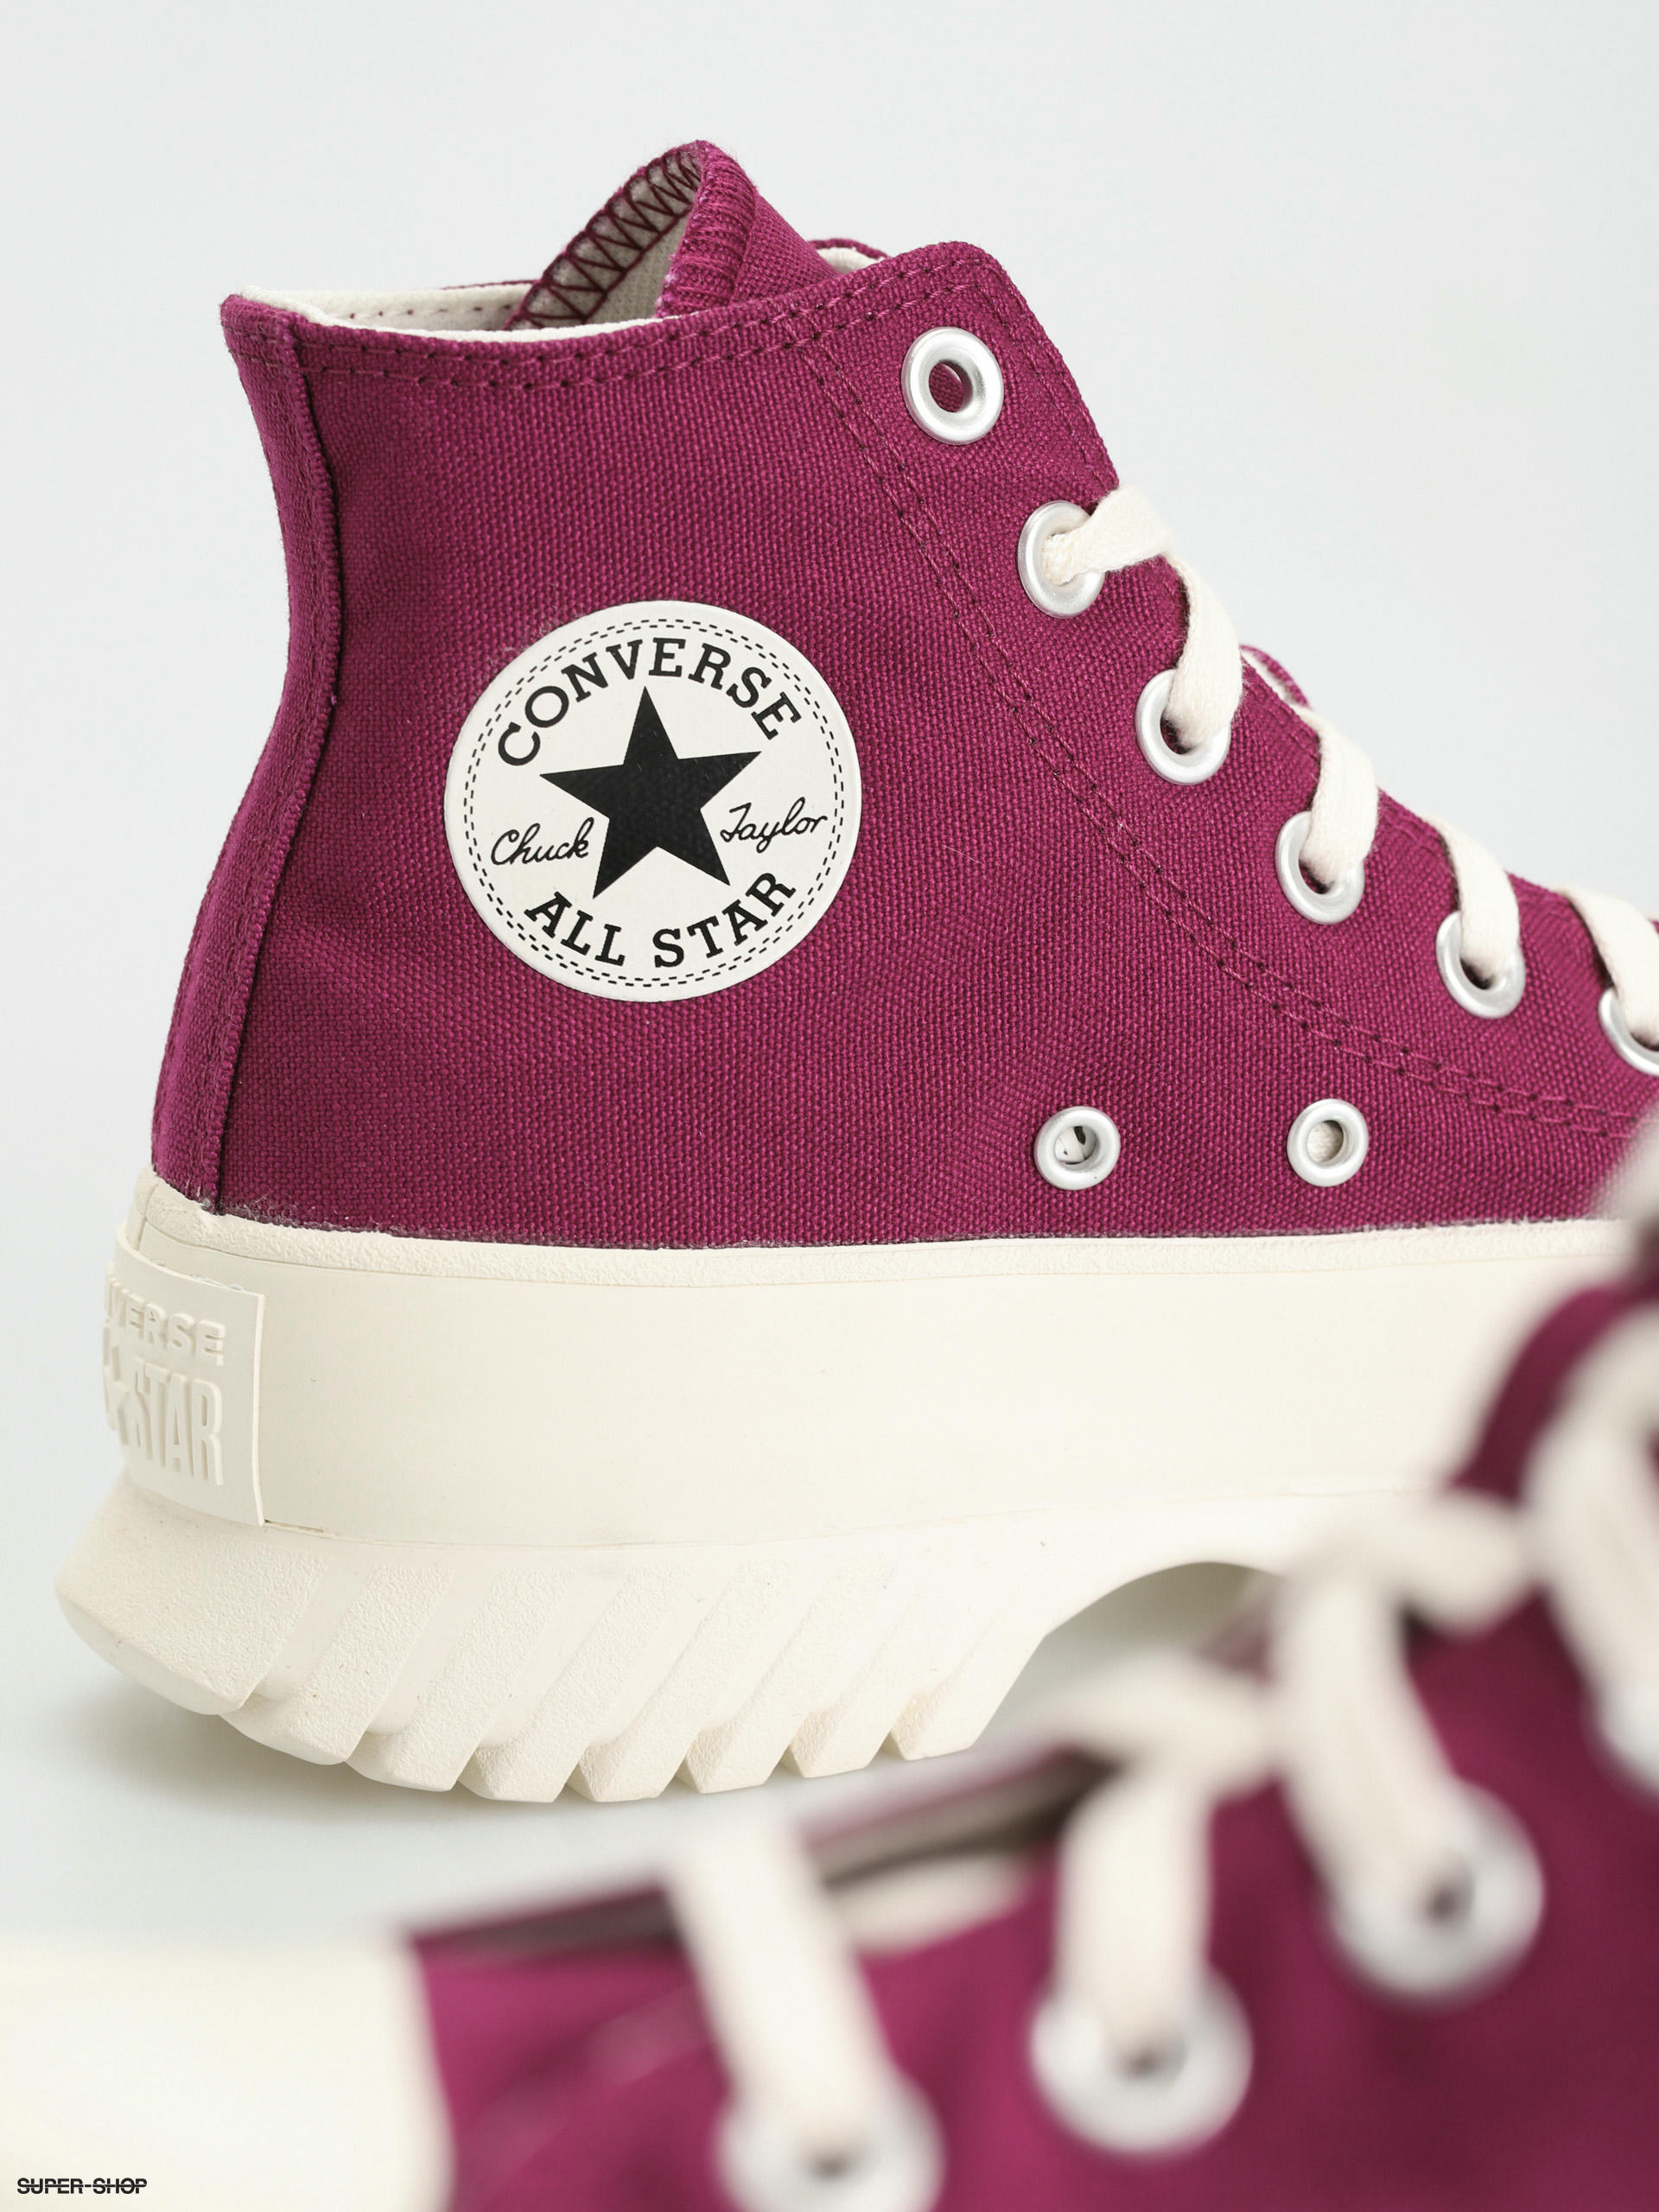 Converse Chuck Taylor All Star Lugged  Hi Shoes (mystic orchid/black)